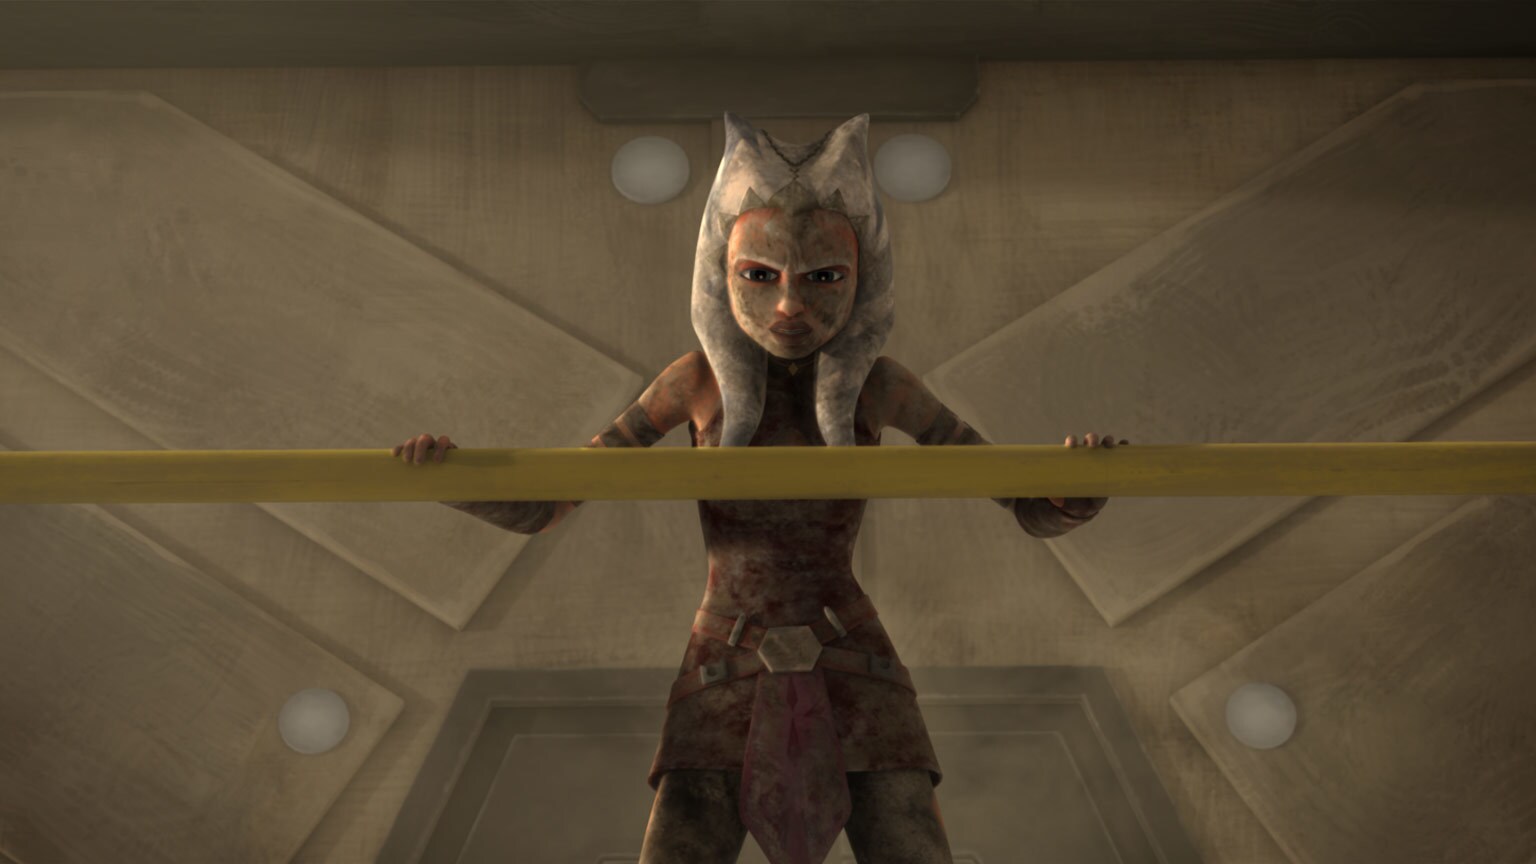 Poll: What's Your Favorite Ahsoka Tano Moment in Star Wars: The Clone Wars (So Far)?